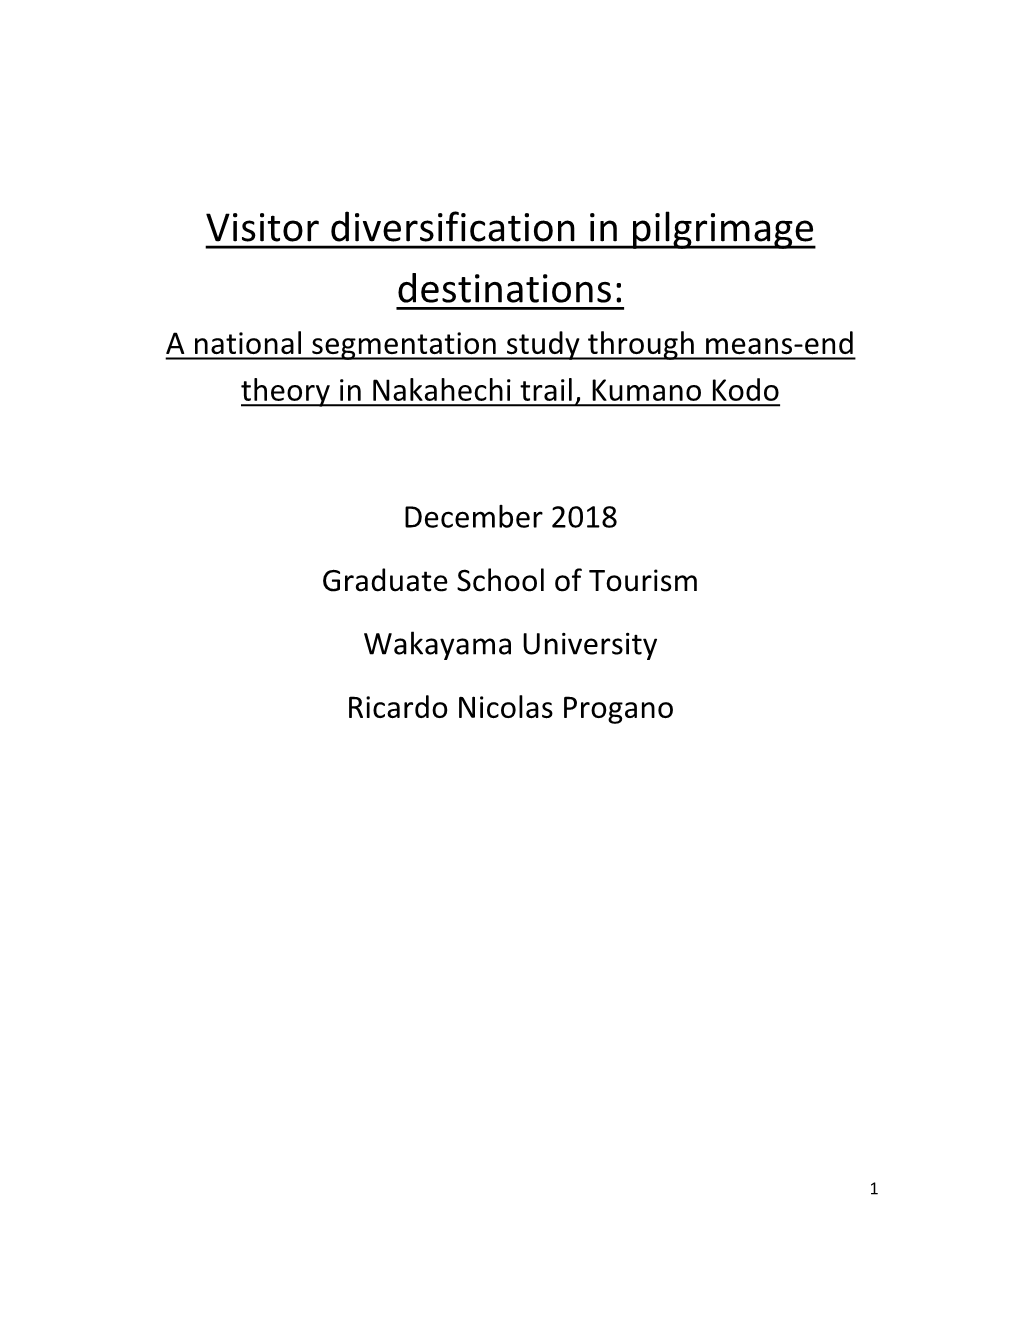 Visitor Diversification in Pilgrimage Destinations: a National Segmentation Study Through Means-End Theory in Nakahechi Trail, Kumano Kodo